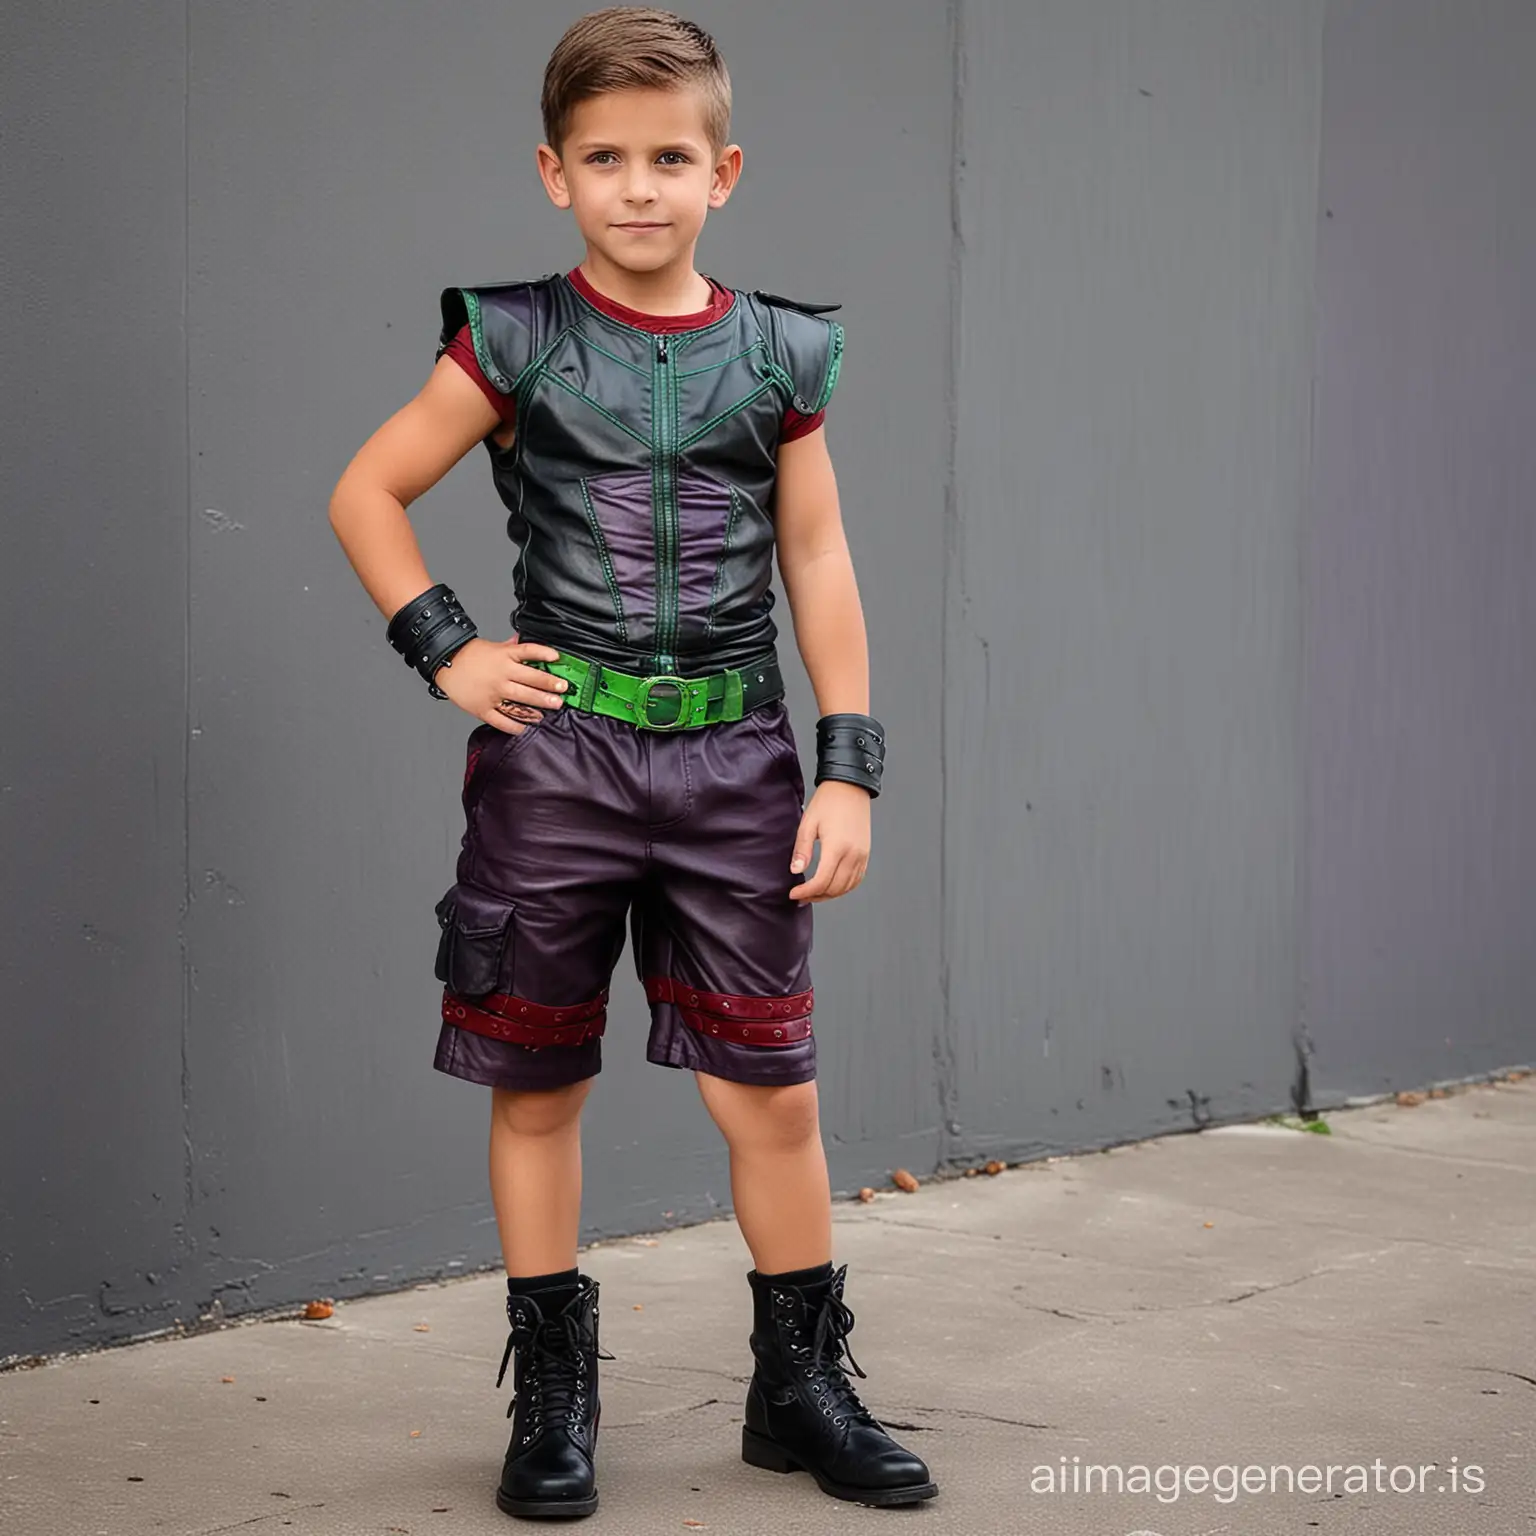 Create a villain outfit for a strong 8 year old boy villain with abs, cool, wicked, leather, shorts, comfortable yet intimidating, various shades of purple and red with hints of green and black